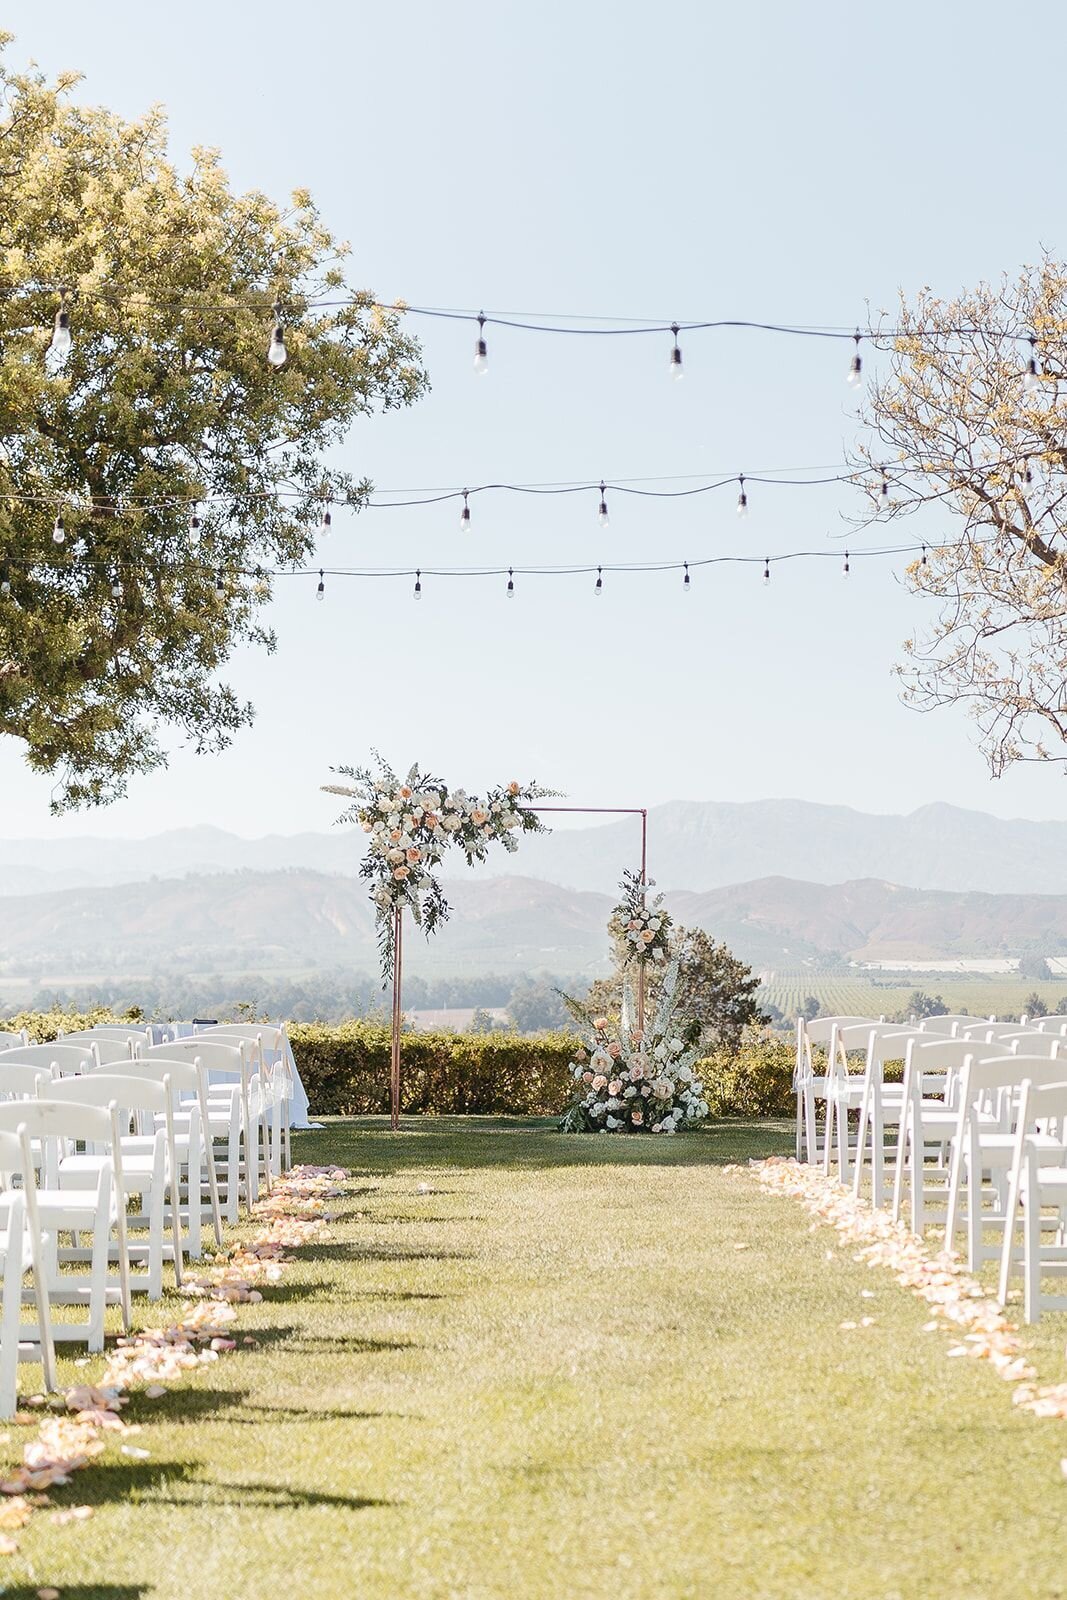 The wedding arbor lined by beautiful flowers overlooking rolling hills.